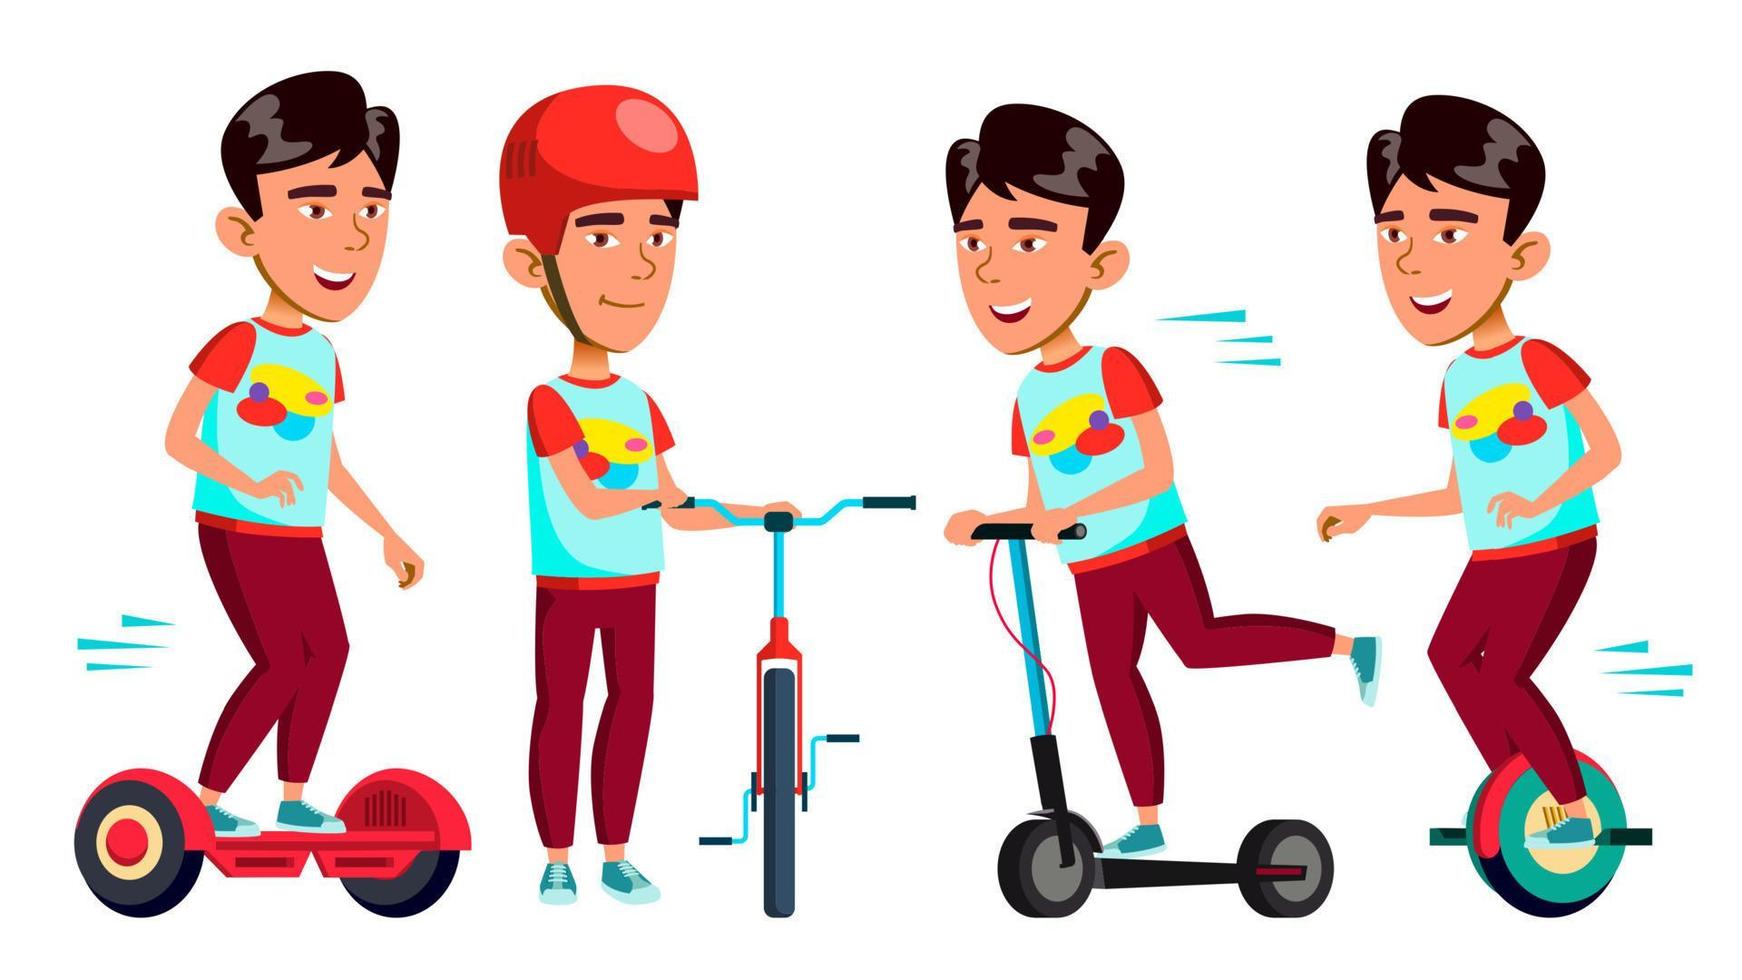 Asian Boy Vector. Primary School Child. Student Expression. Summer Activity. Bike, Scooter. Rides On Mono Cycle. Lifestyle. For Print, Invitation Design. Isolated Cartoon Illustration vector